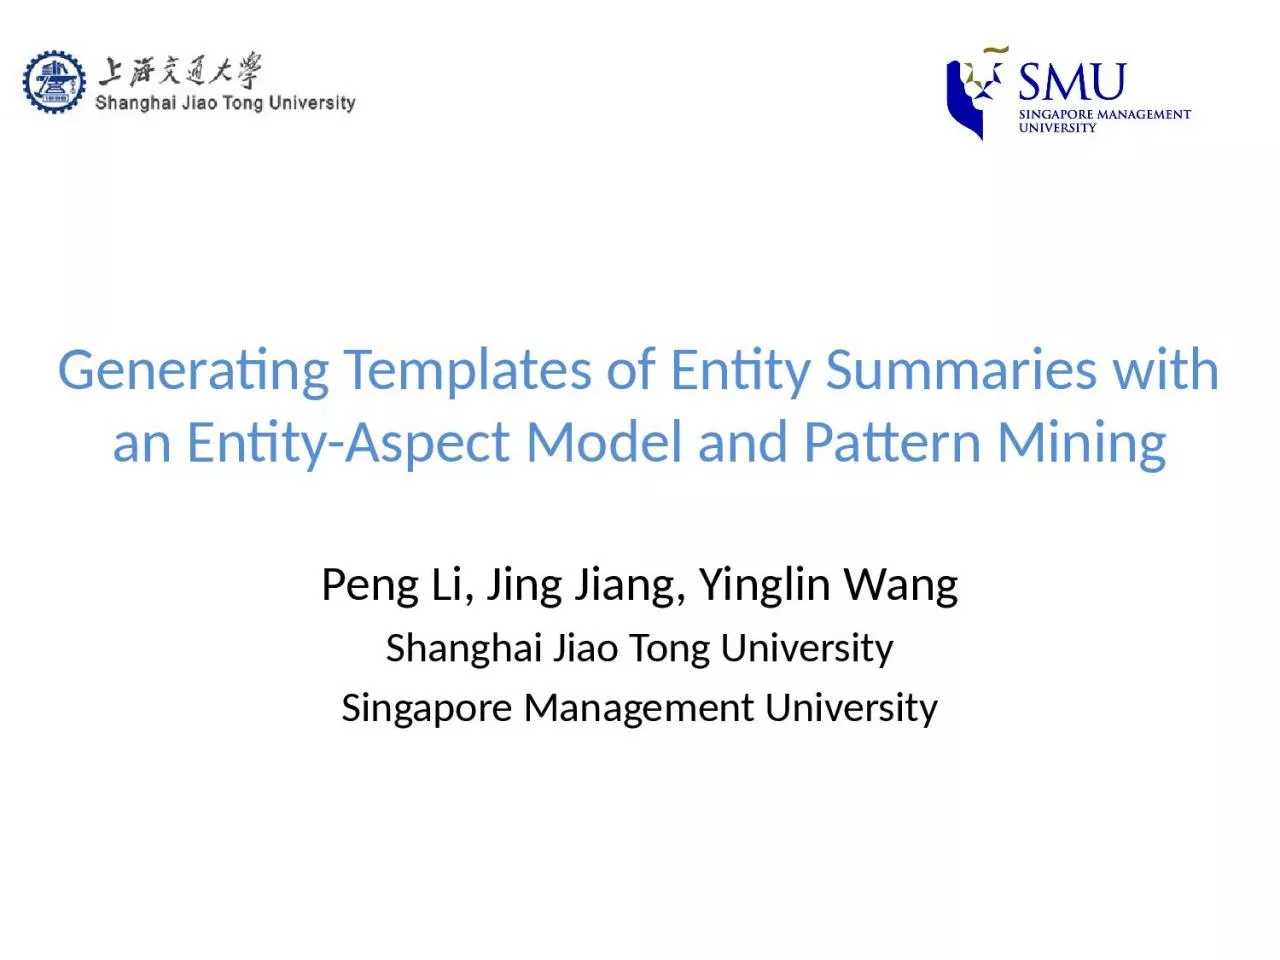 Generating Templates of Entity Summaries with an Entity-Aspect Model and Pattern Mining